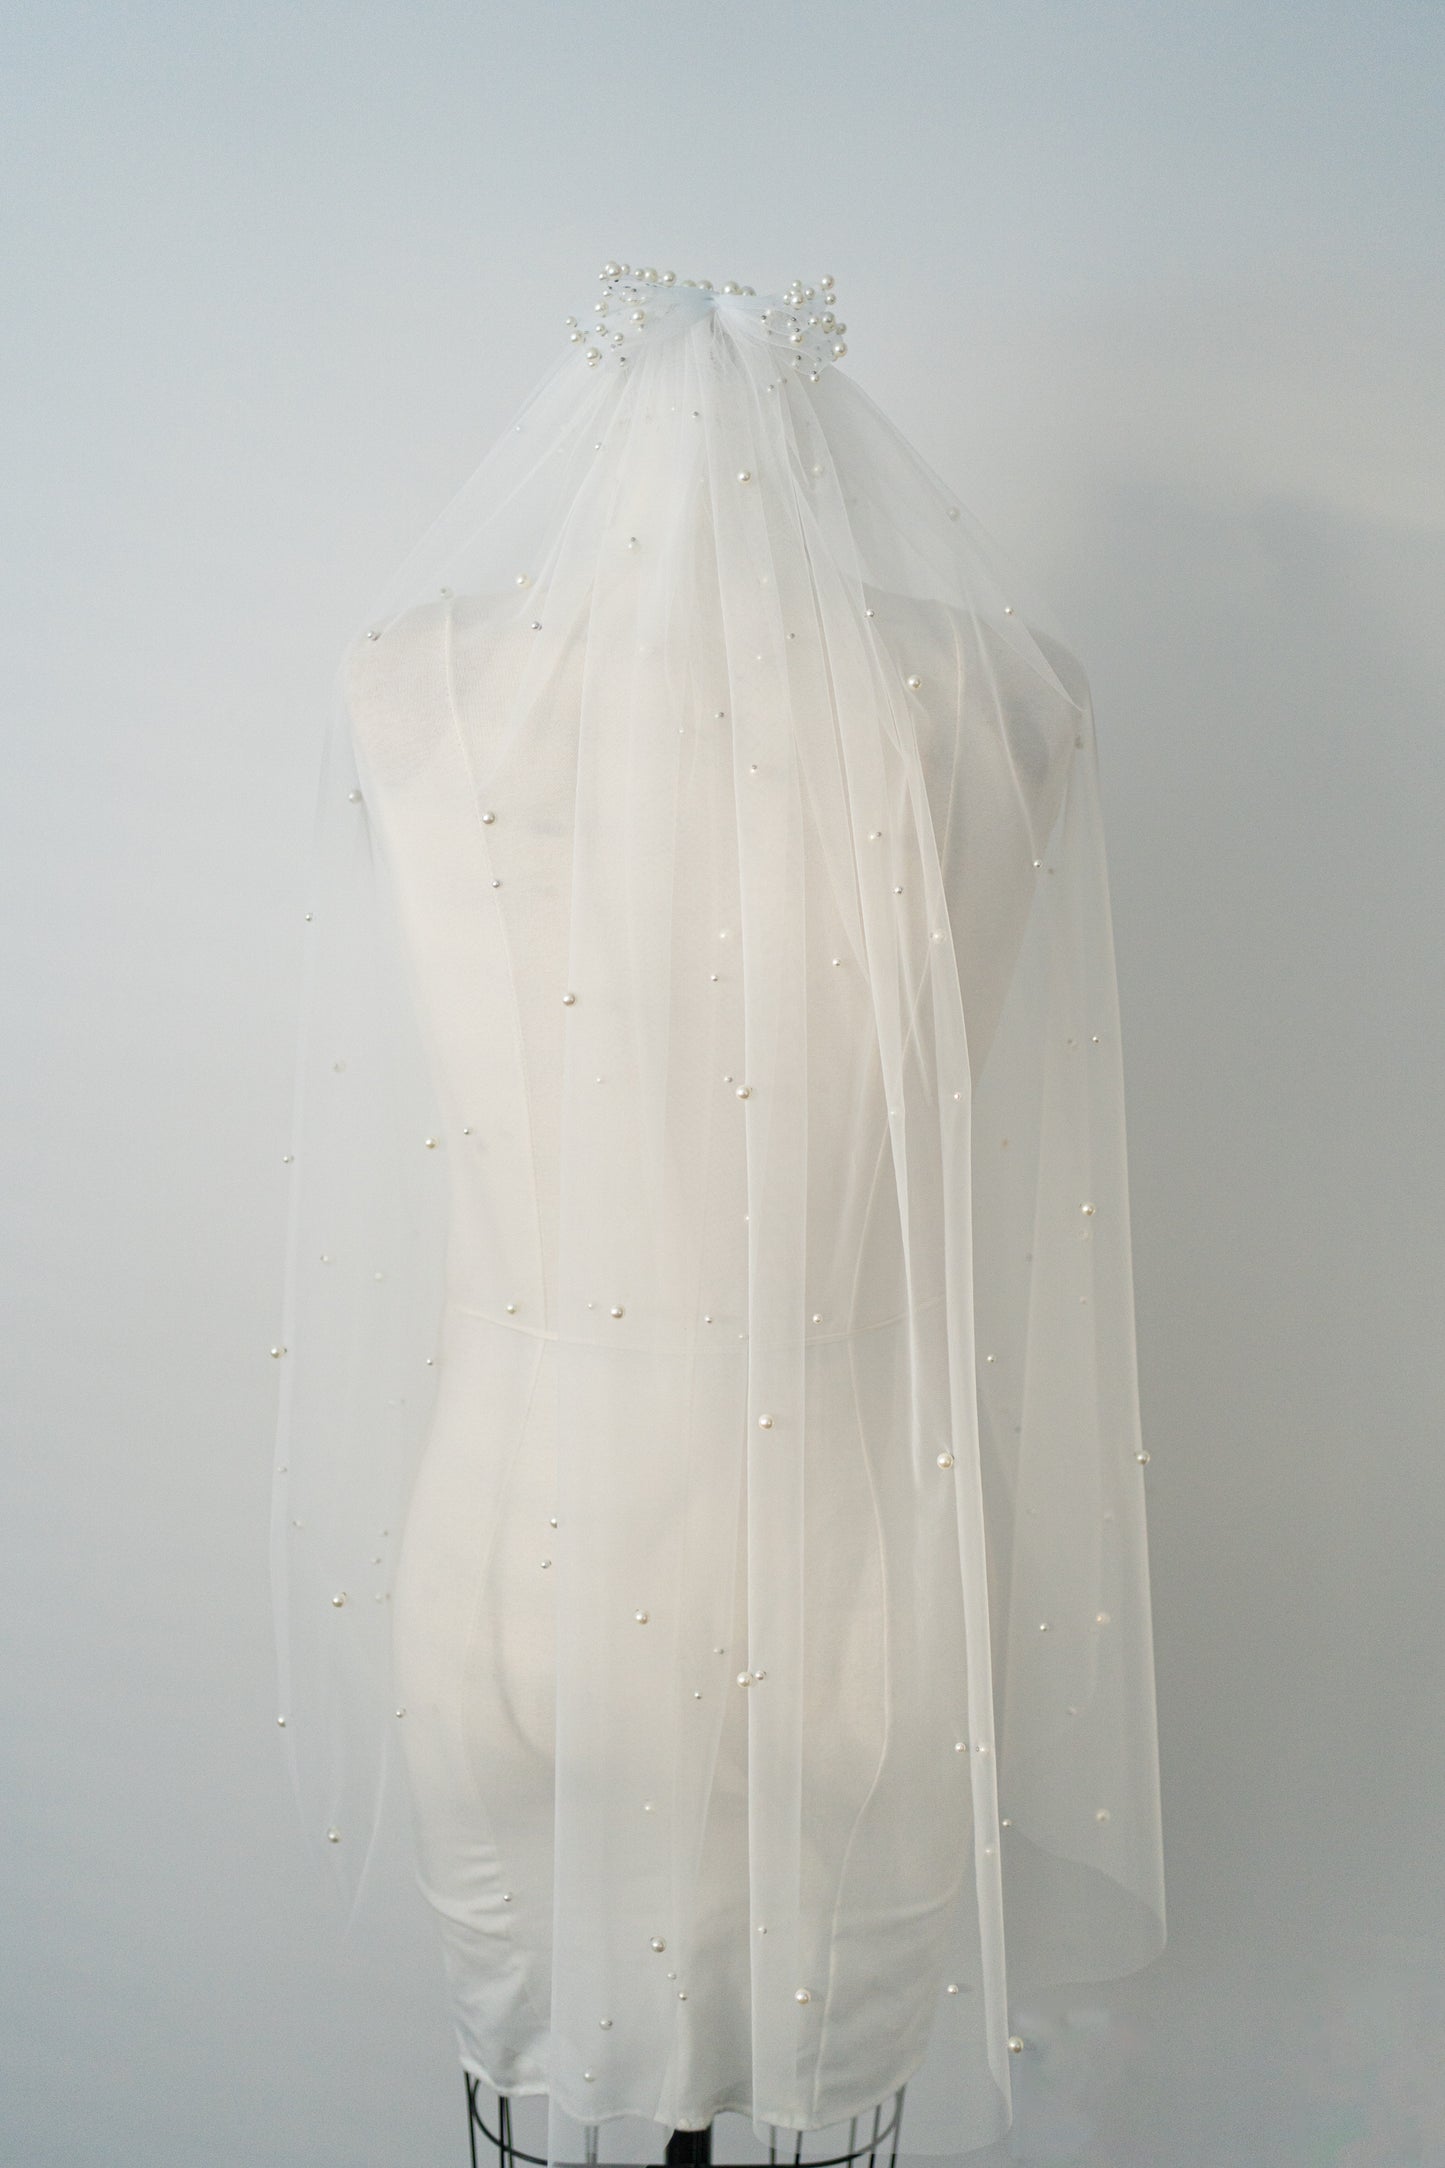 Pearl Bow Veil with Comb